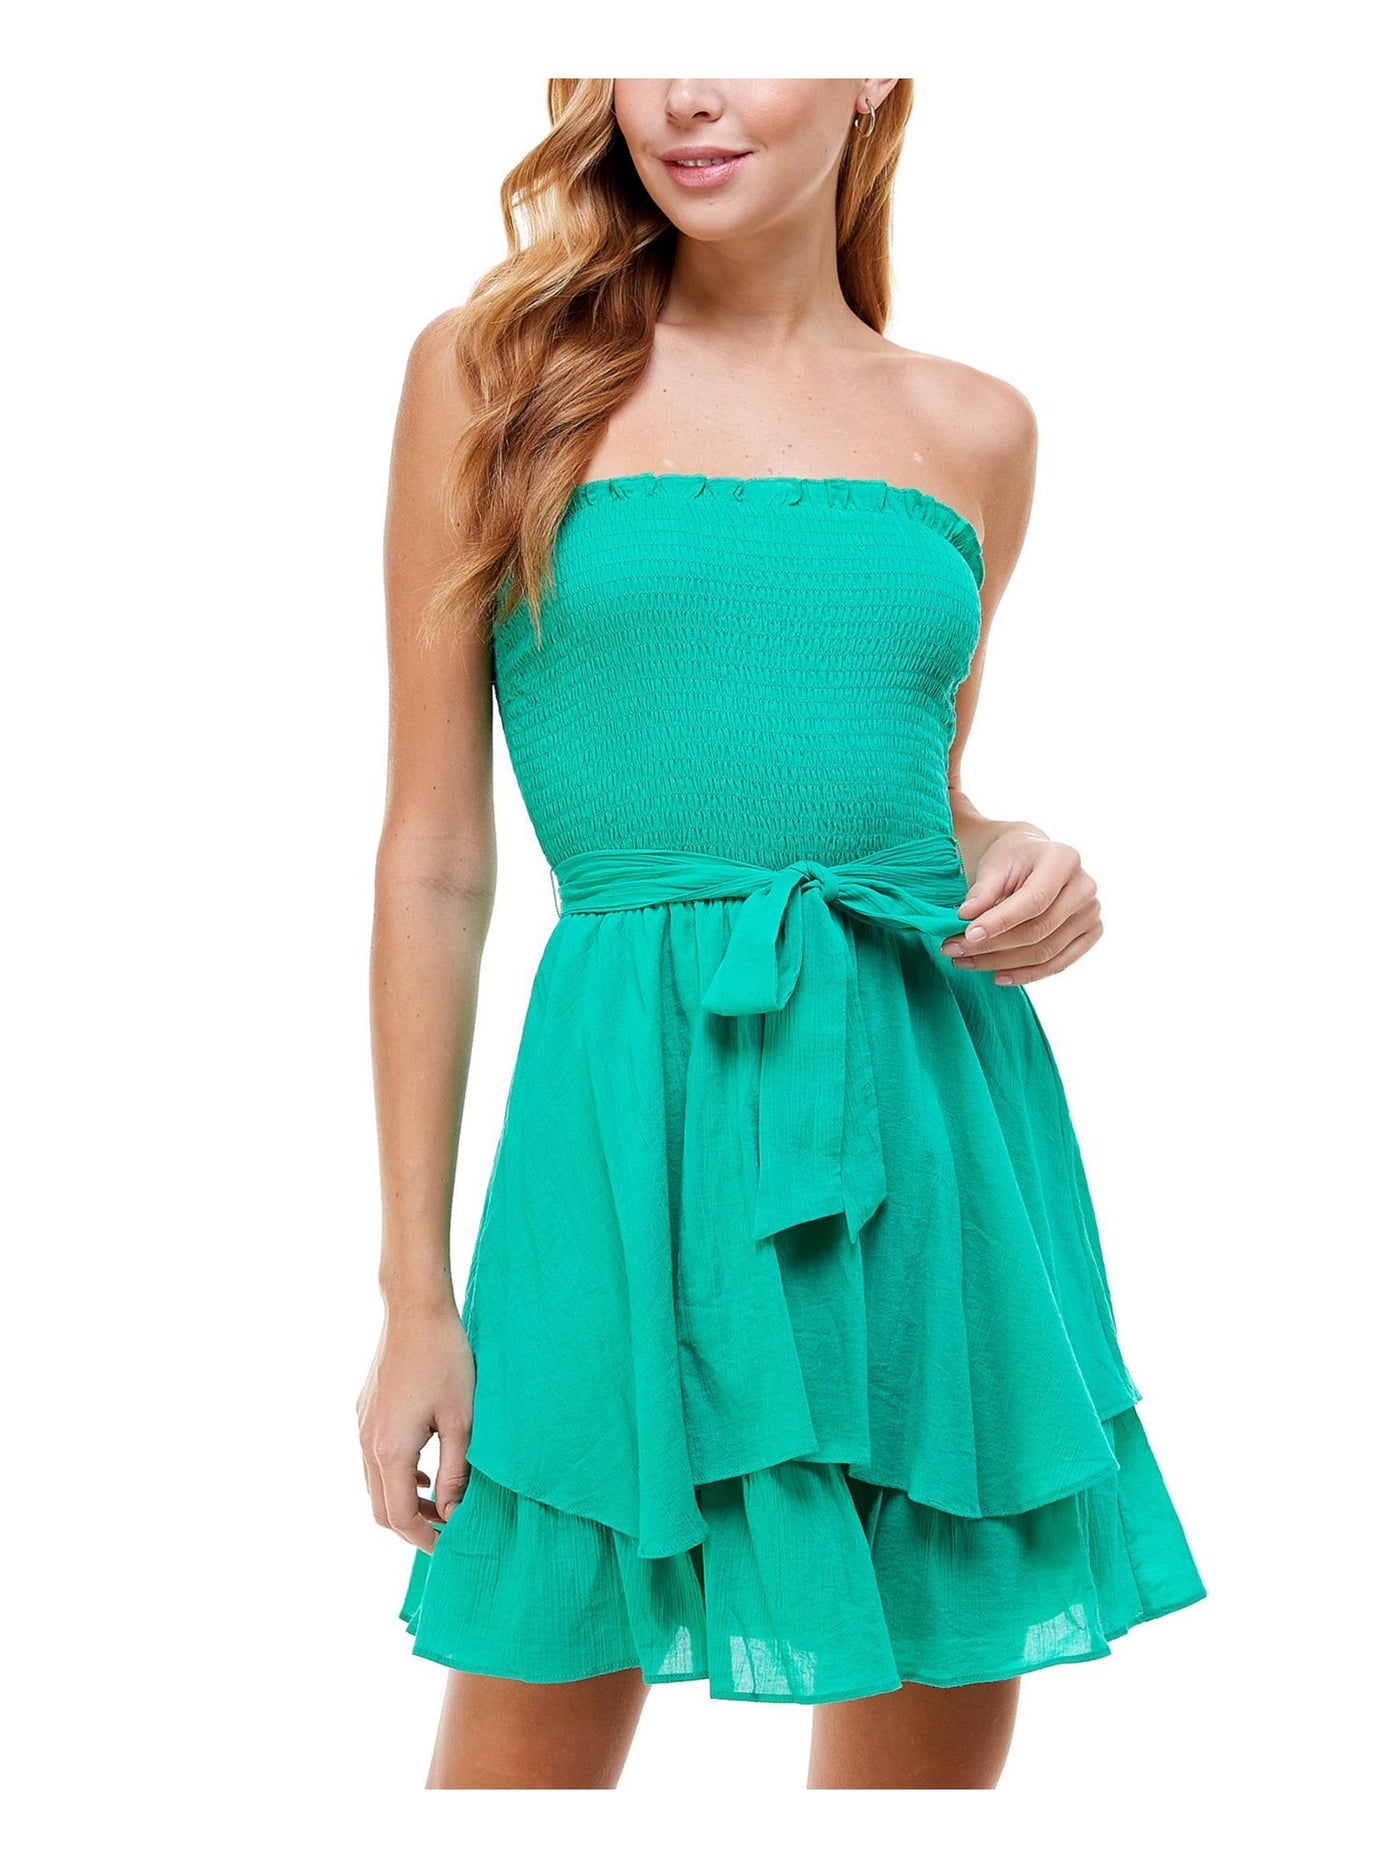 CITY STUDIO Womens Ruffled Tie Smocked Strapless Short Party Fit + Flare Dress